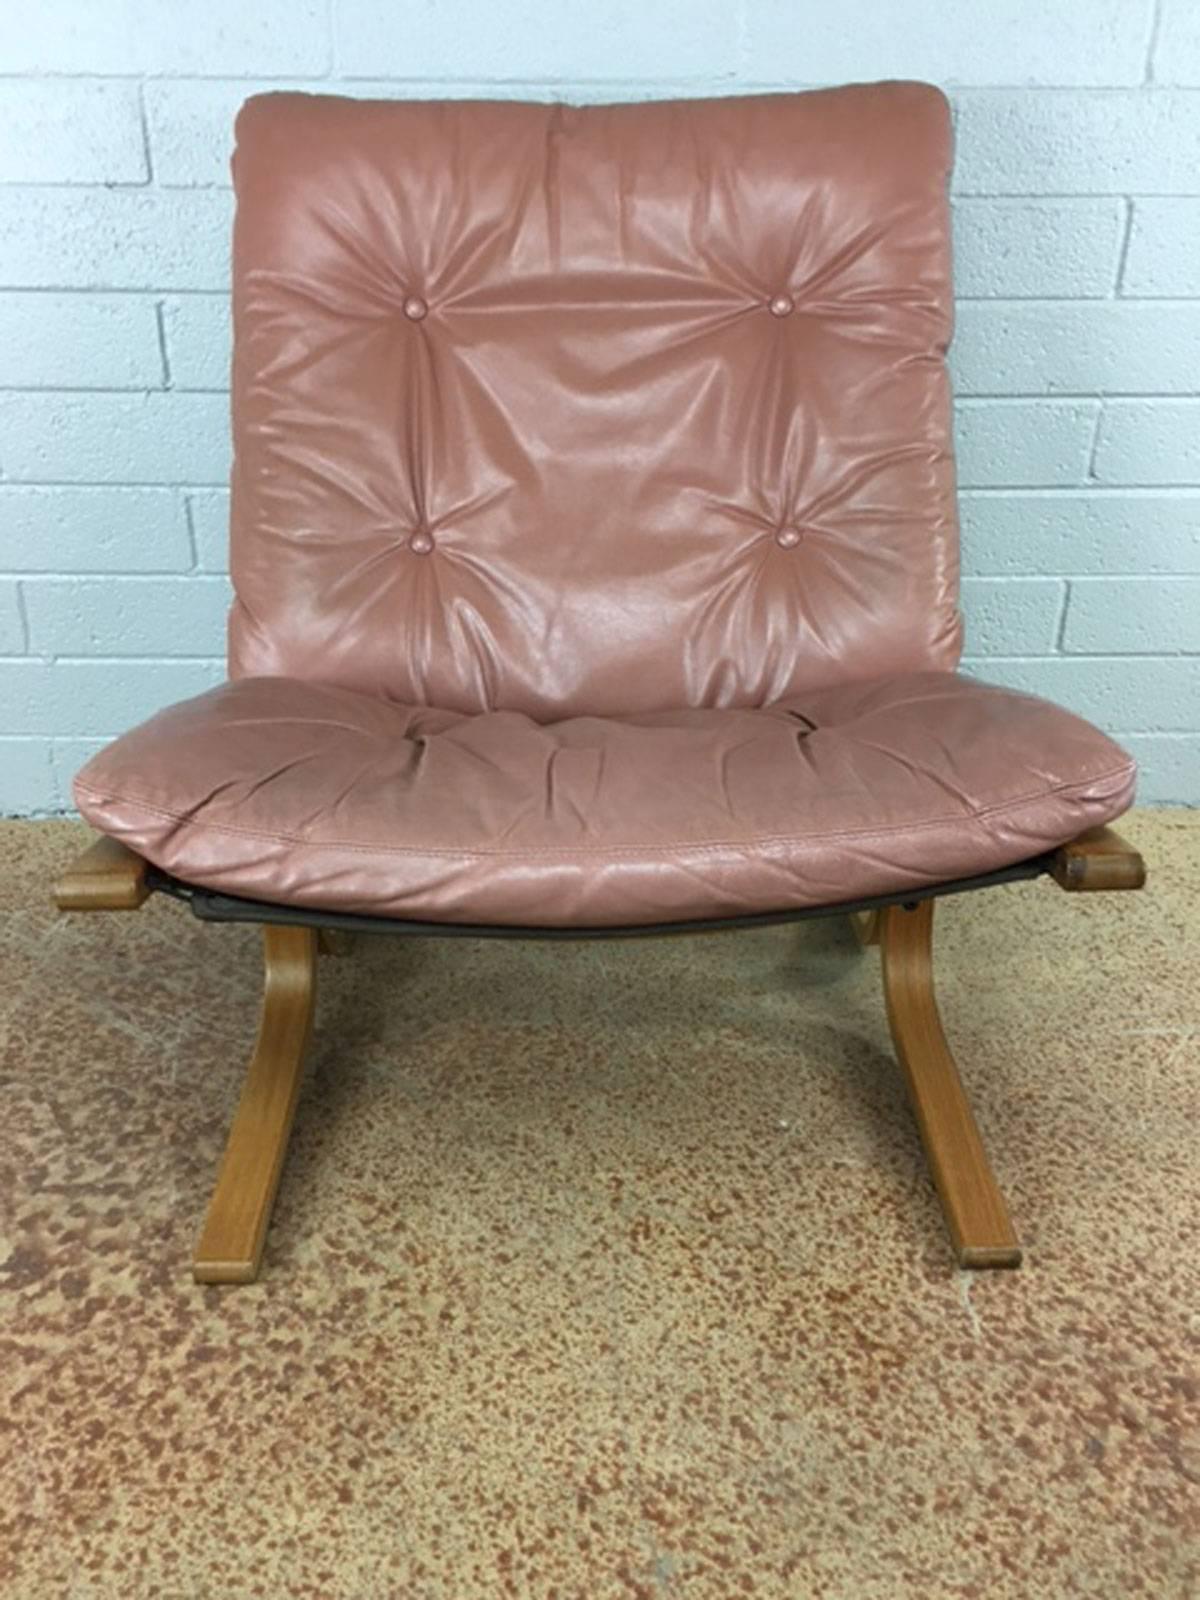 Well maintained side chair by Westnofa. No rips, tears or holes in the leather. Very good overall condition.